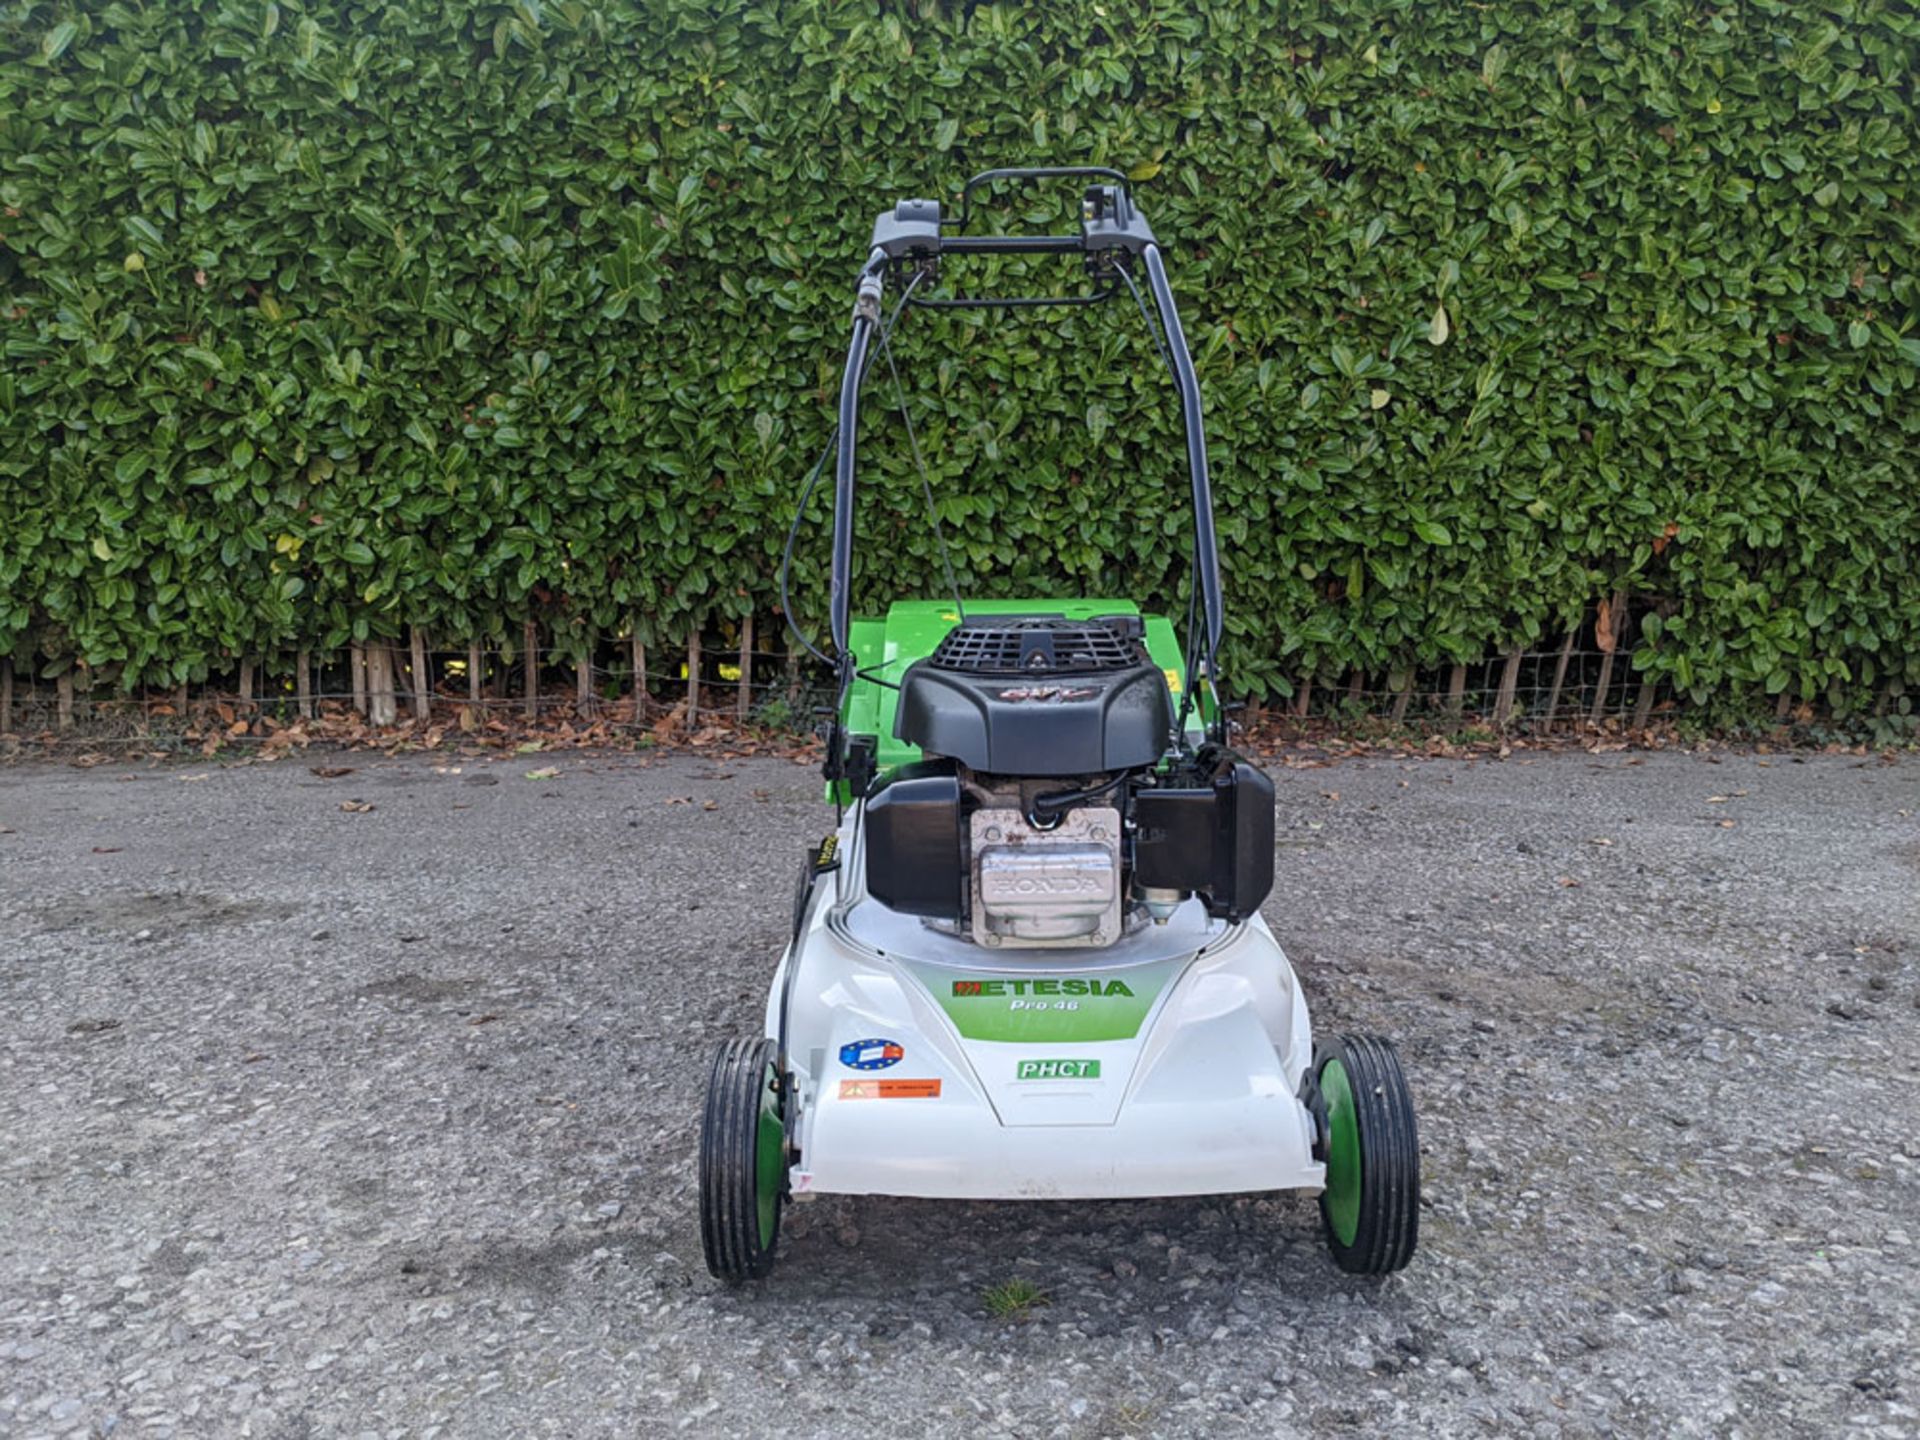 2019 Etesia Pro 46 PHCT 18" Self Propelled Lawn Mower - Image 2 of 5